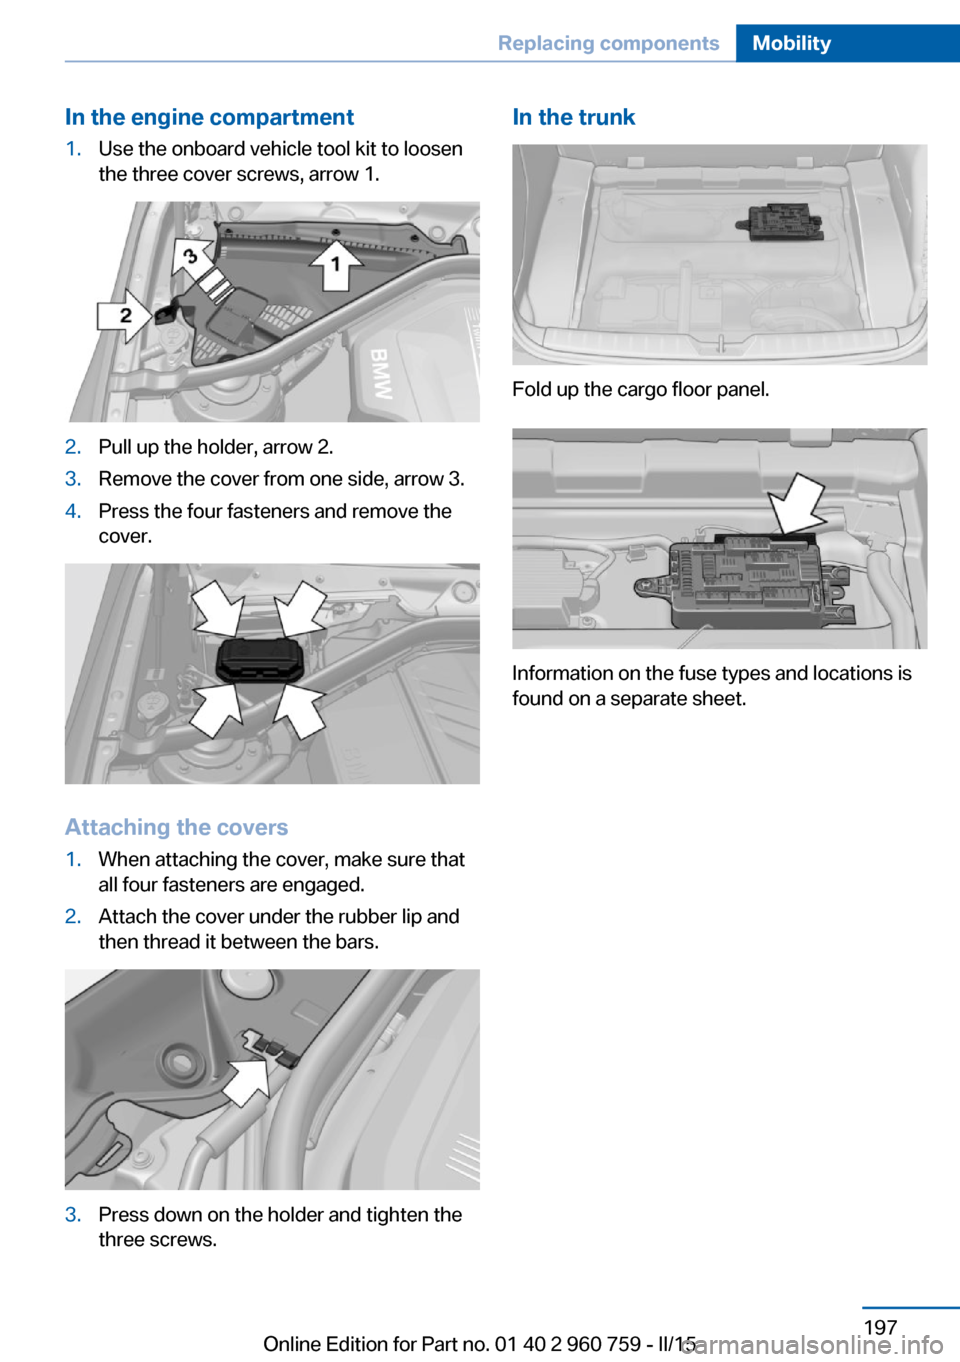 BMW M3 2016 F80 Owners Manual In the engine compartment1.Use the onboard vehicle tool kit to loosen
the three cover screws, arrow 1.2.Pull up the holder, arrow 2.3.Remove the cover from one side, arrow 3.4.Press the four fasteners